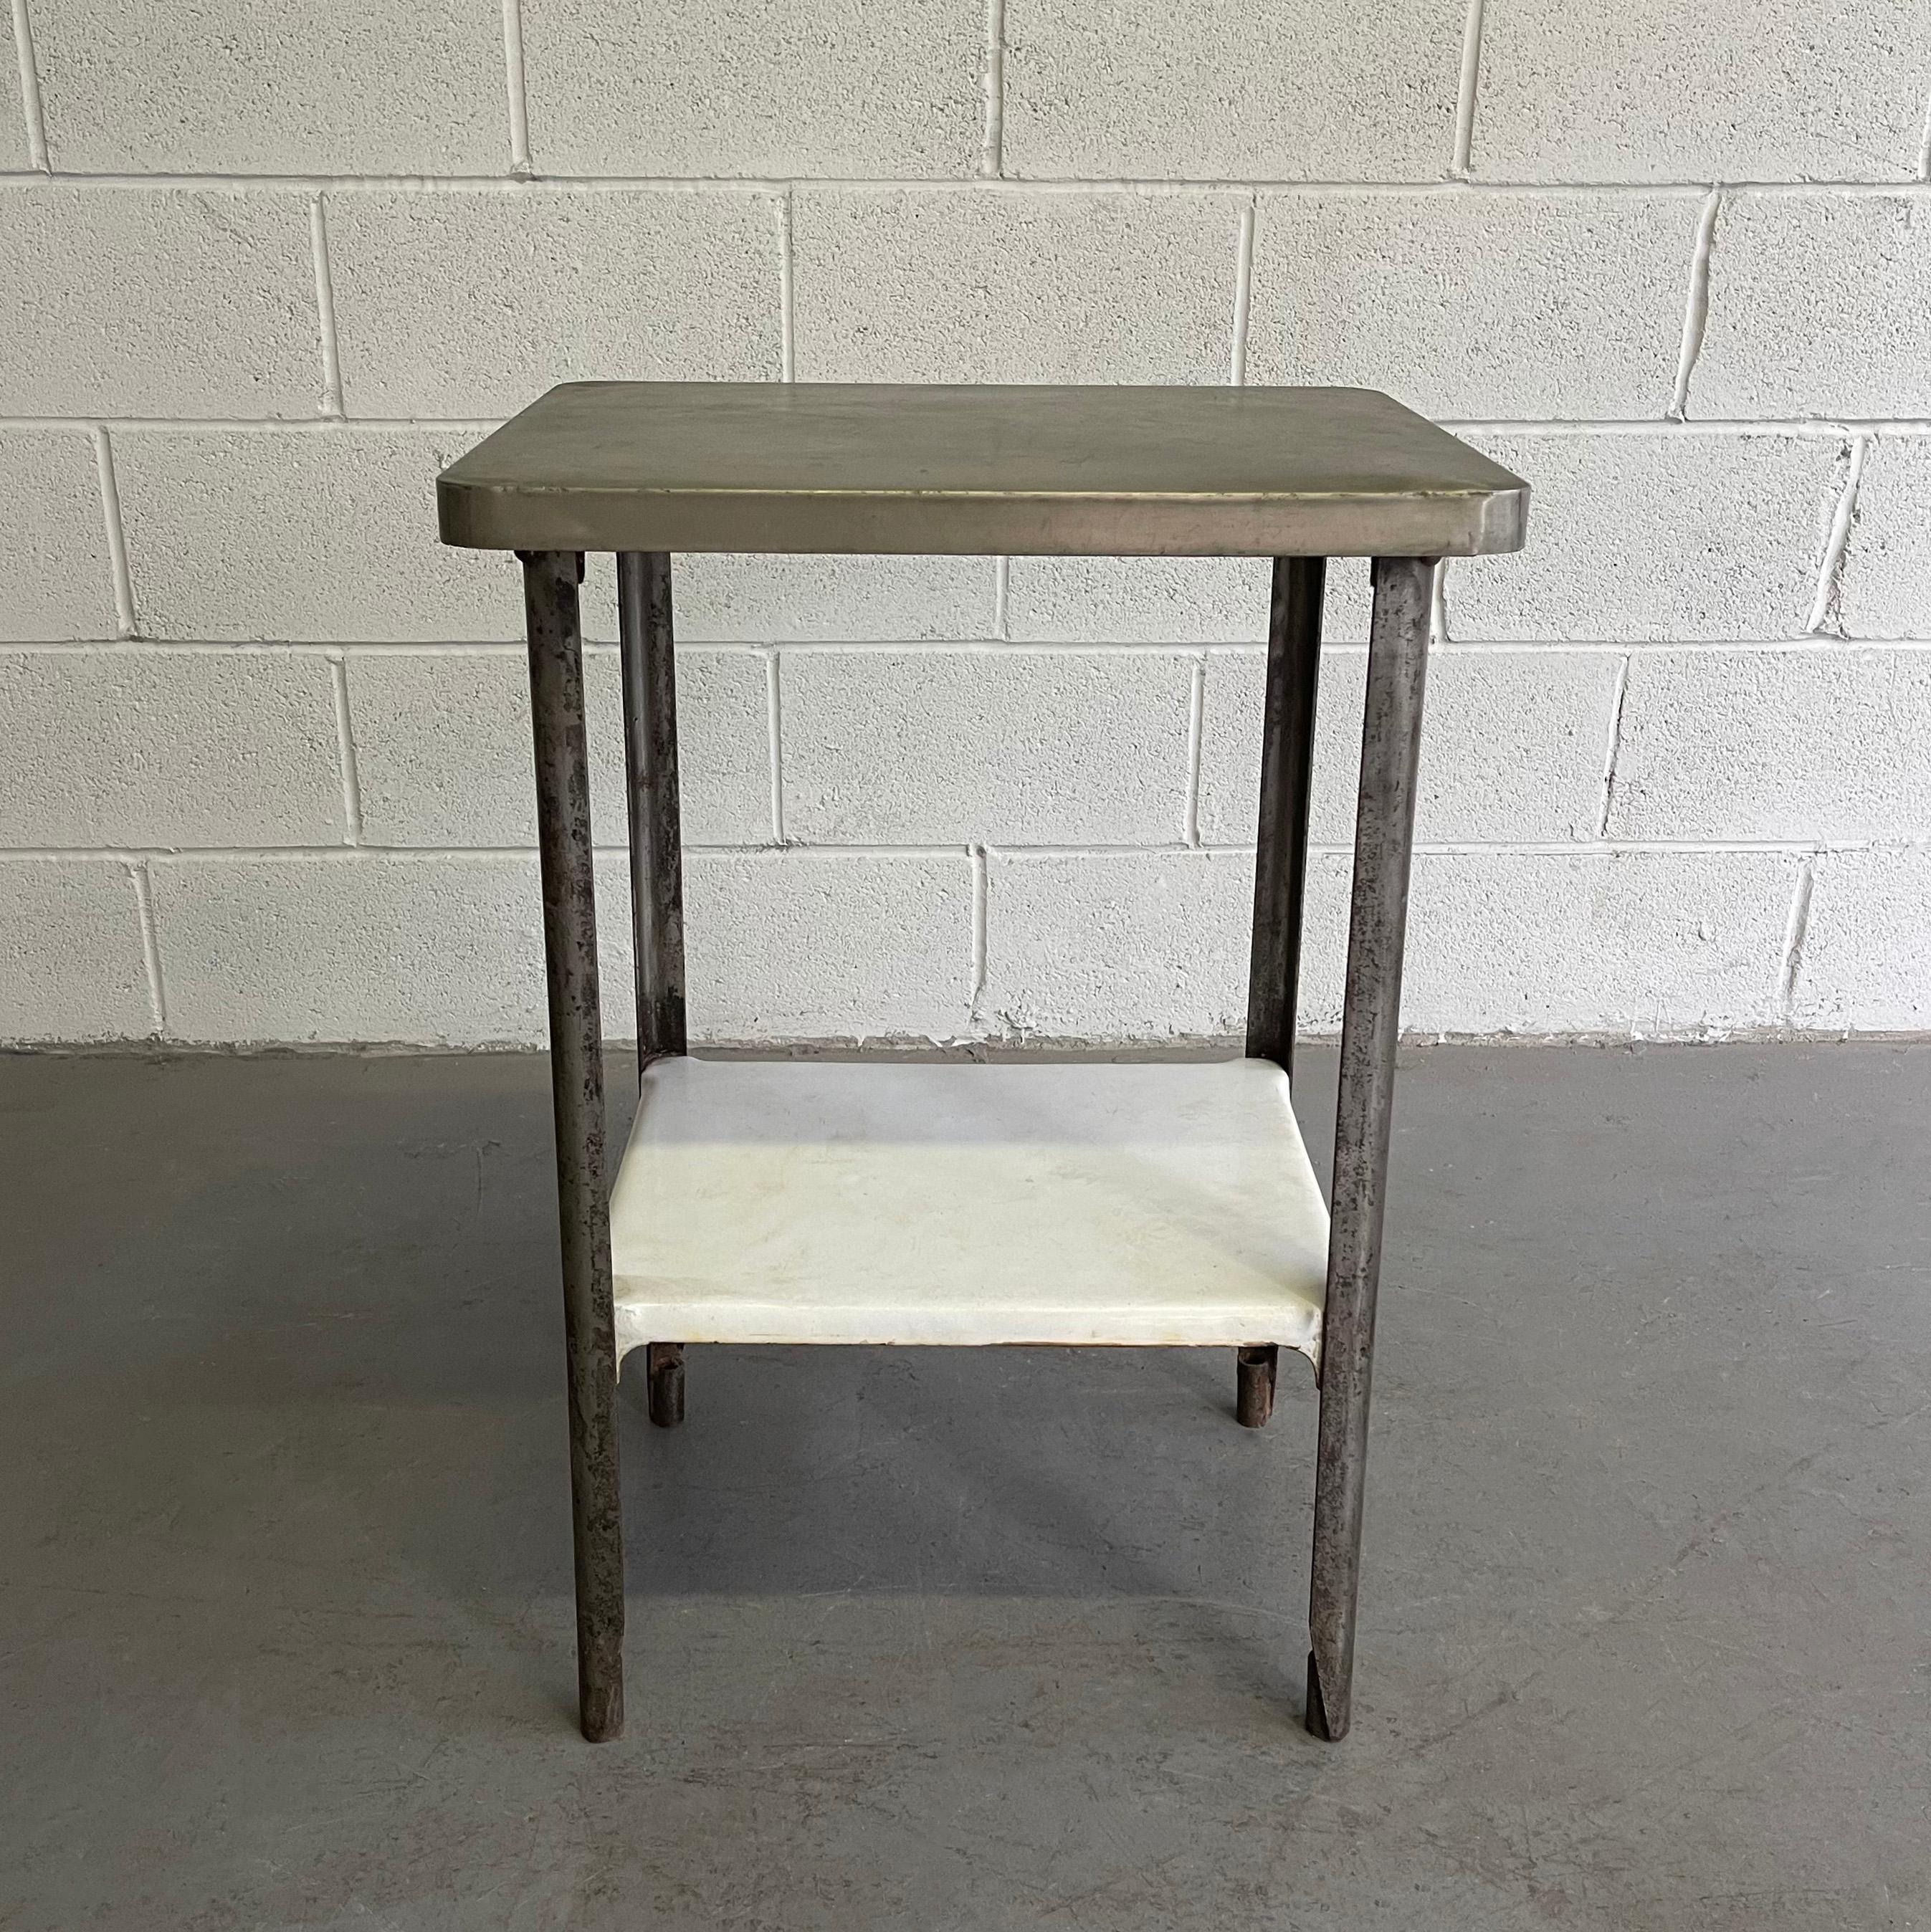 Antique, industrial, zinc covered, cast iron, apothecary prep table features an enameled cast iron lower shelf at 11 inches height.